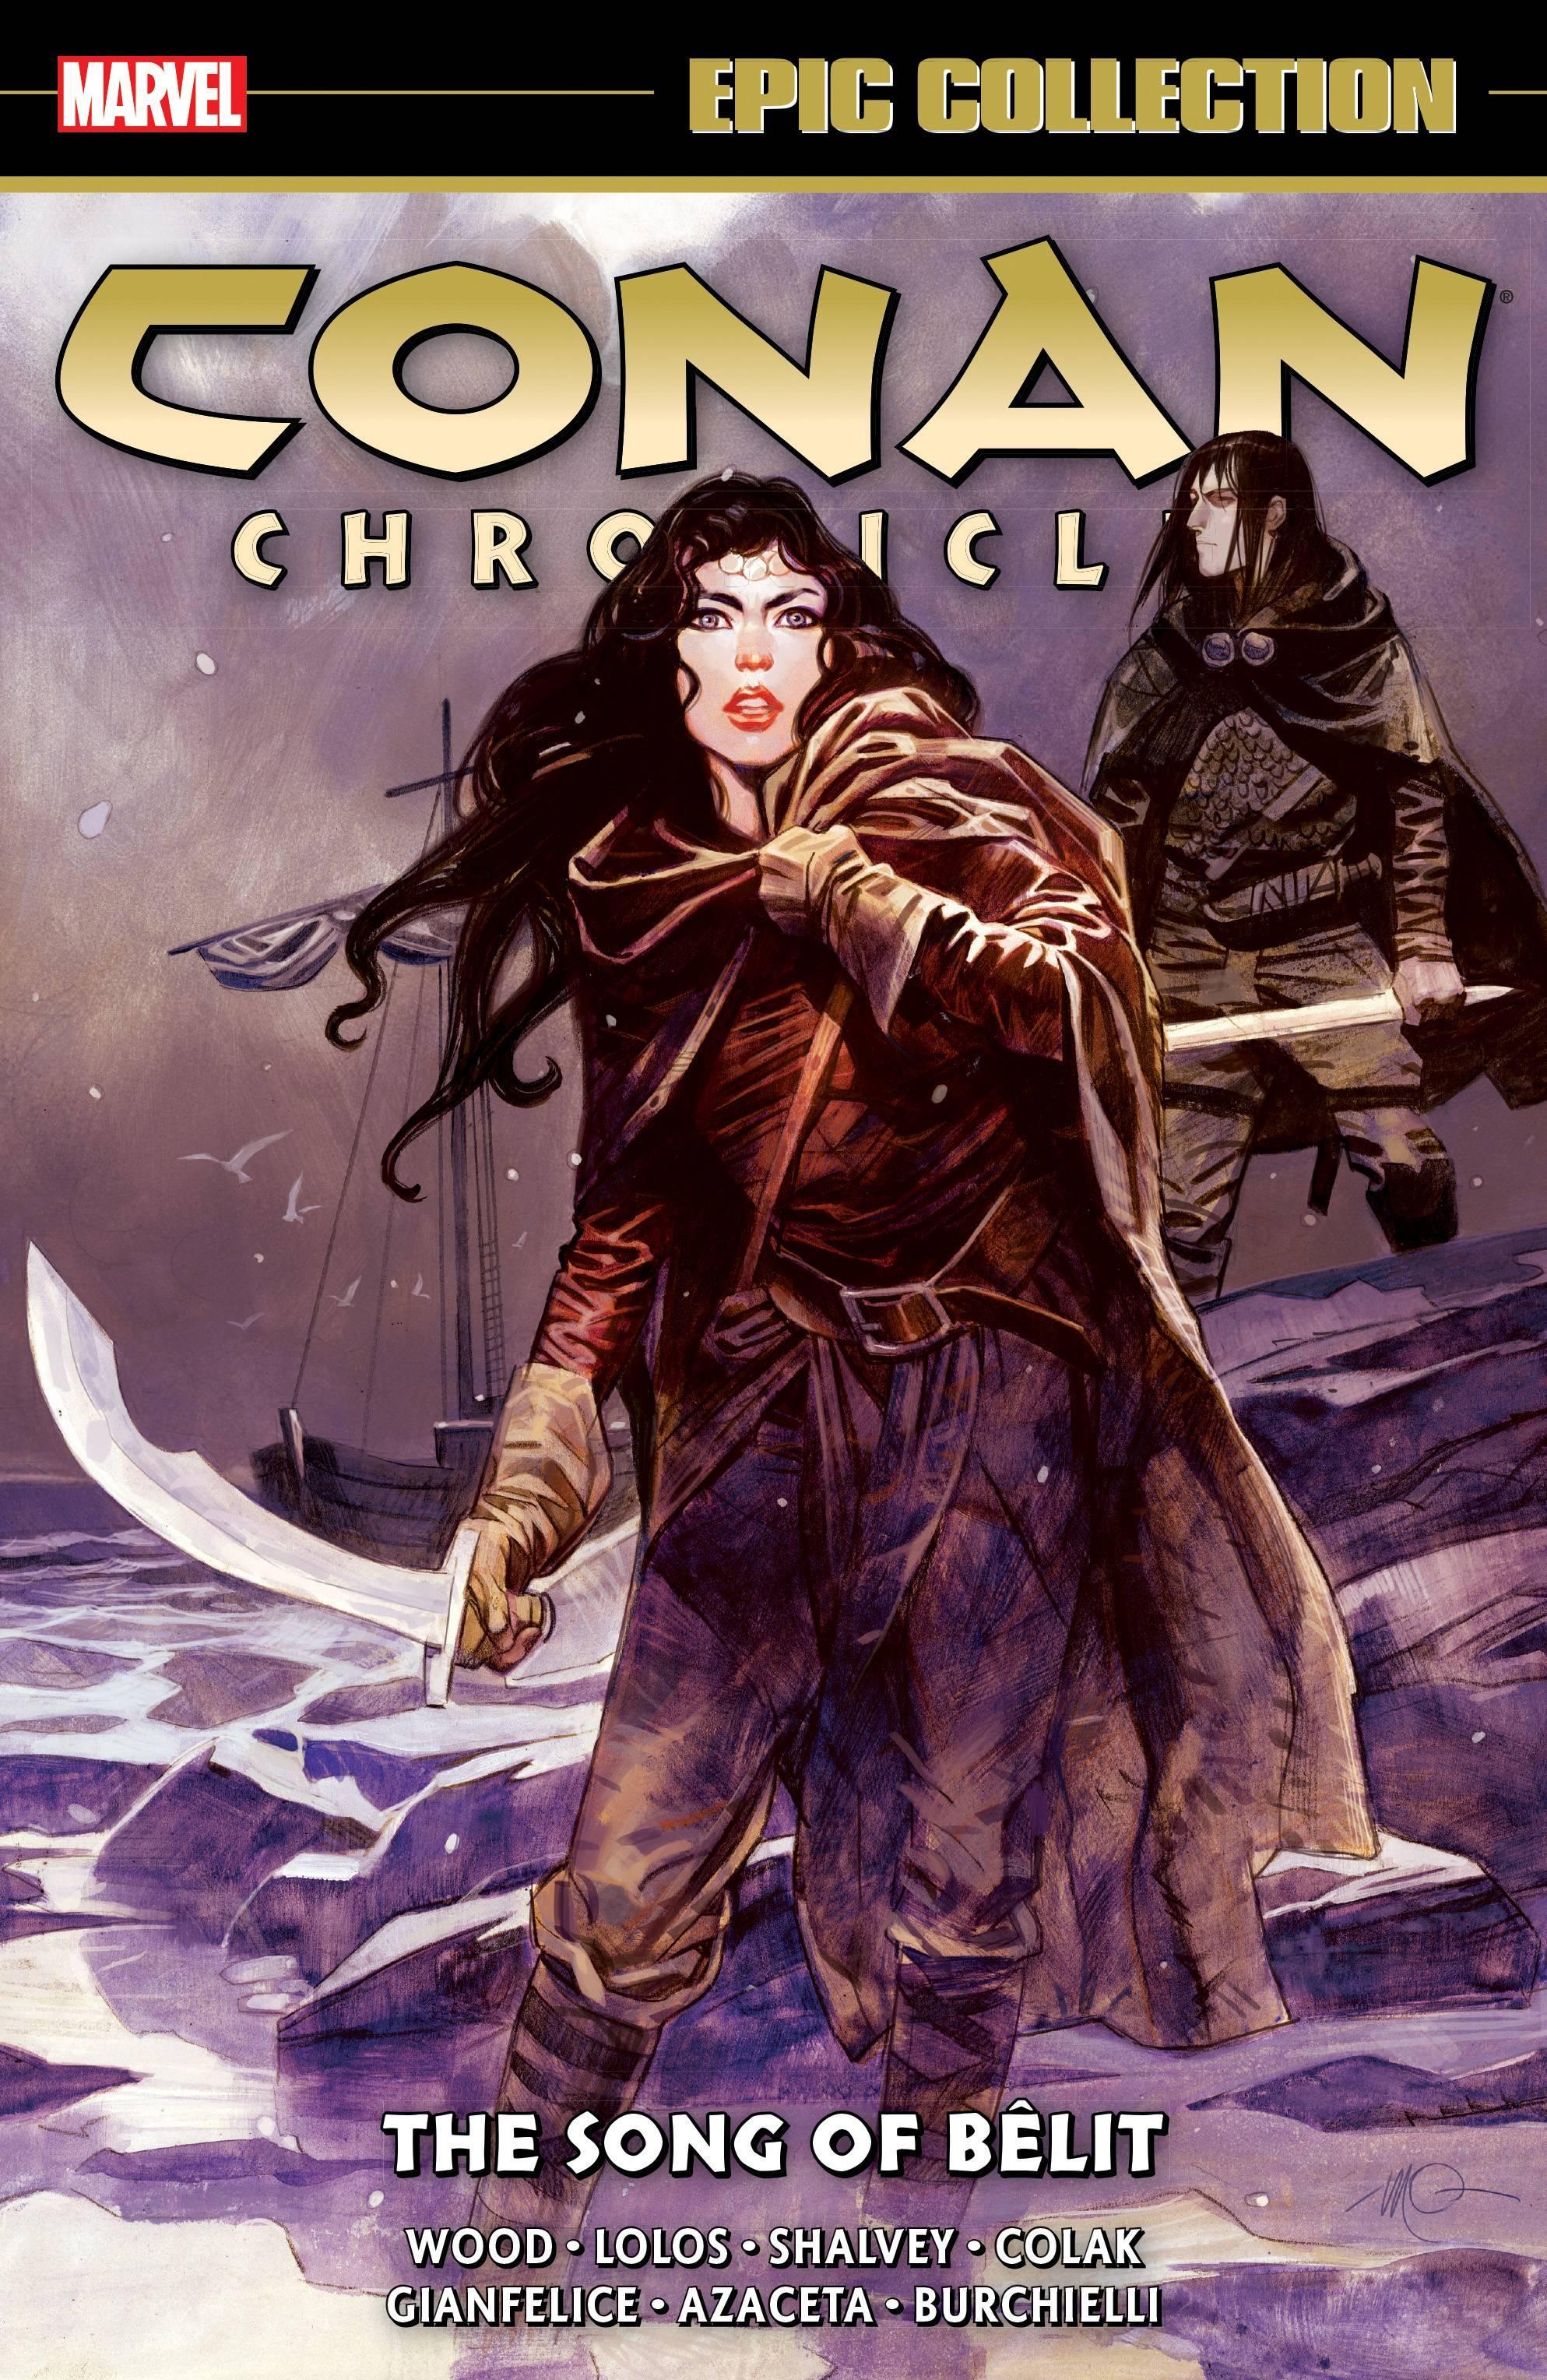 CONAN CHRONICLES EPIC COLLECTION TP SONG OF BELIT - Kings Comics